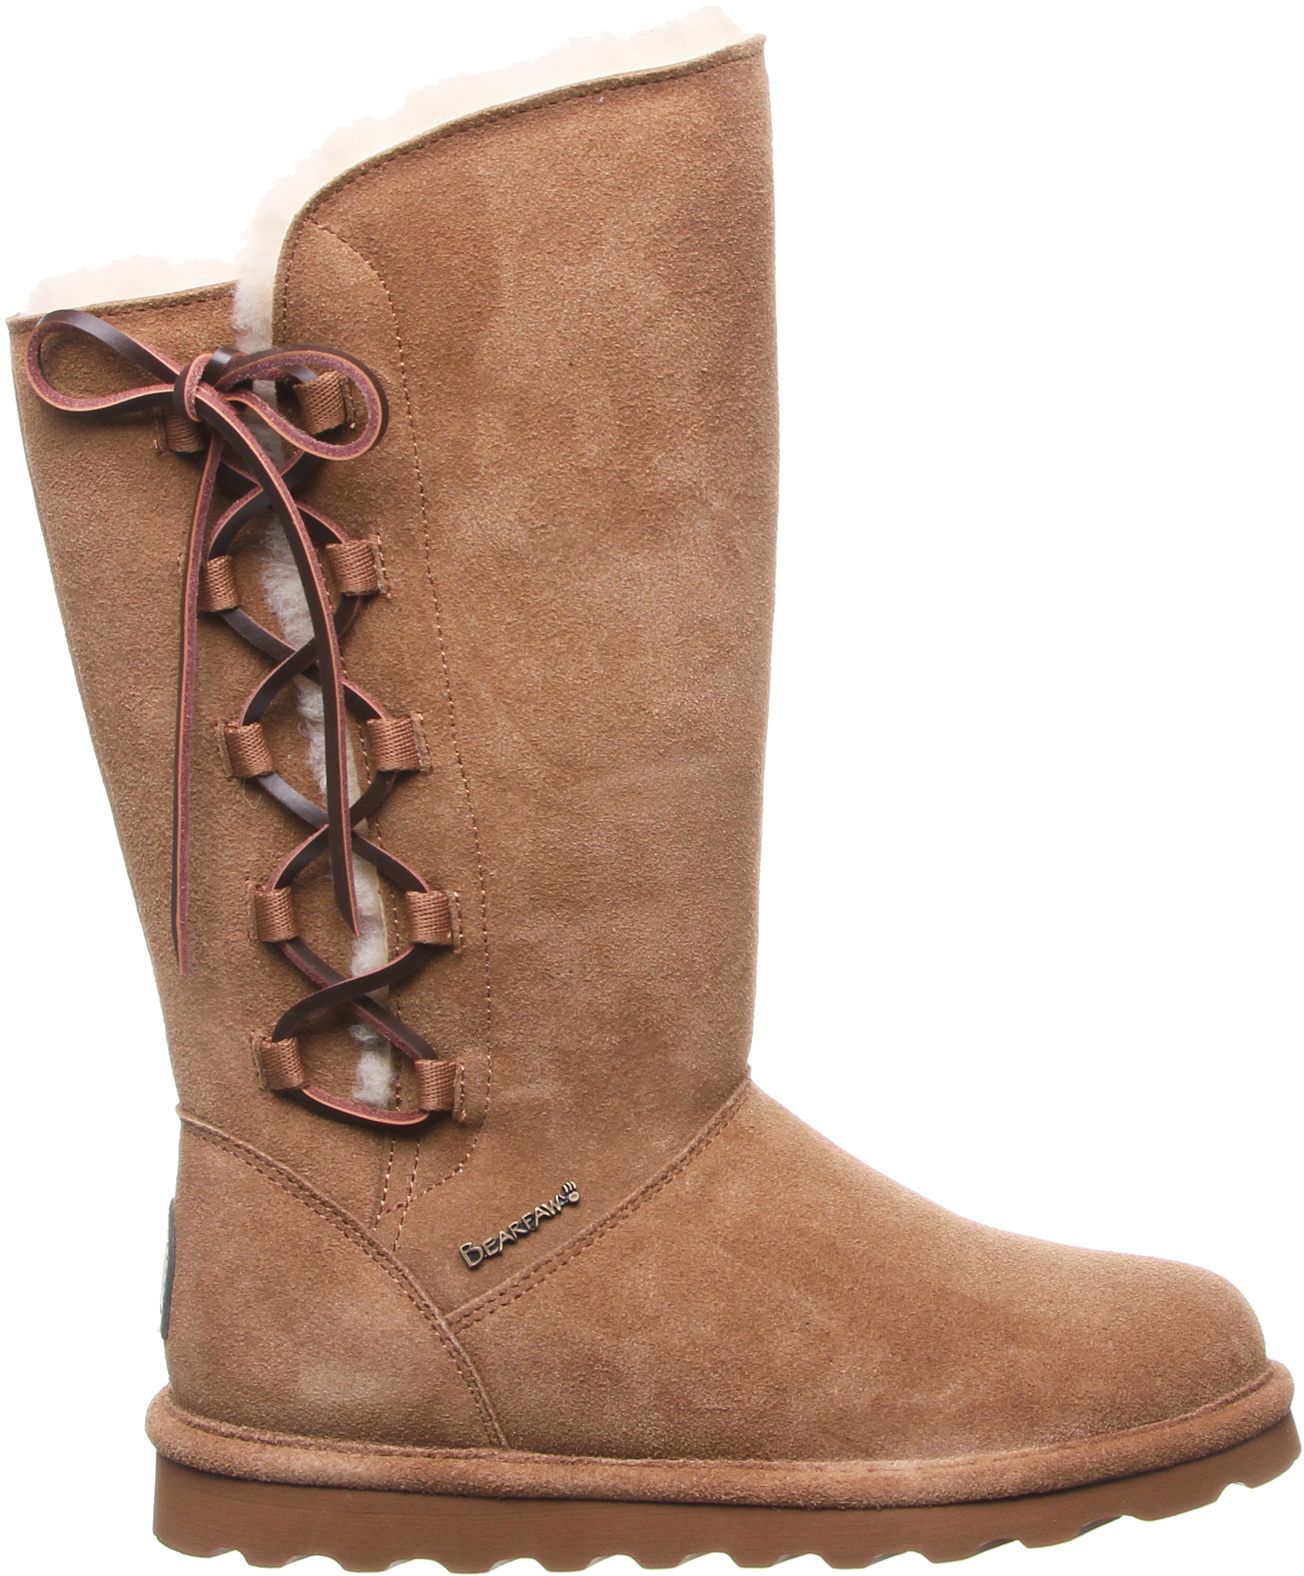 bearpaw boots in stores